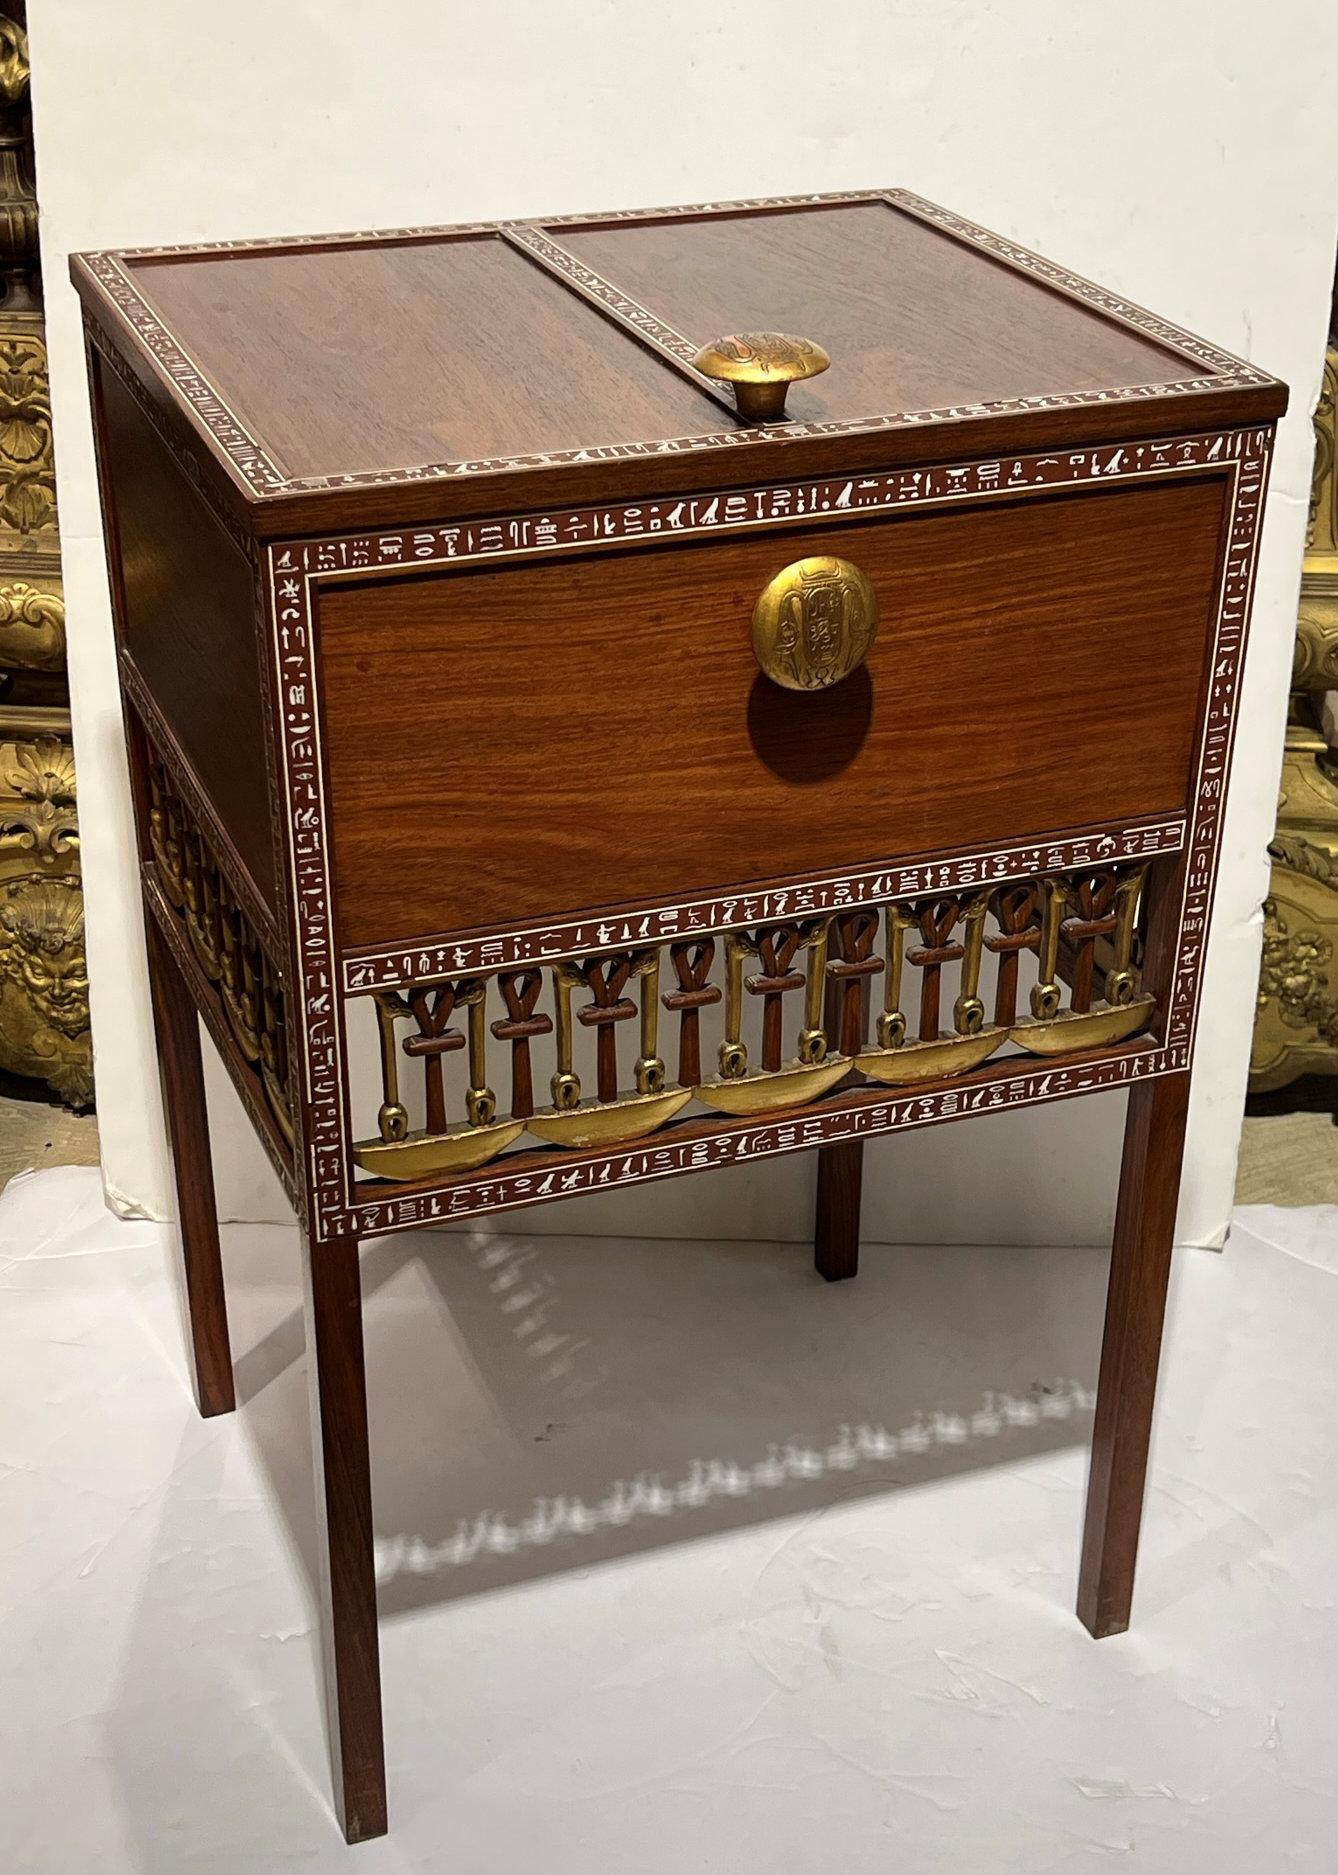 A 1930s reproduction of King Tutankhamun's chest with hieroglyphics. Wood construction with inlaid hieroglyphics and Glided detail. Features a hinged top with original Gilded knobs and divided interior with pierced skirt on tall squared legs.